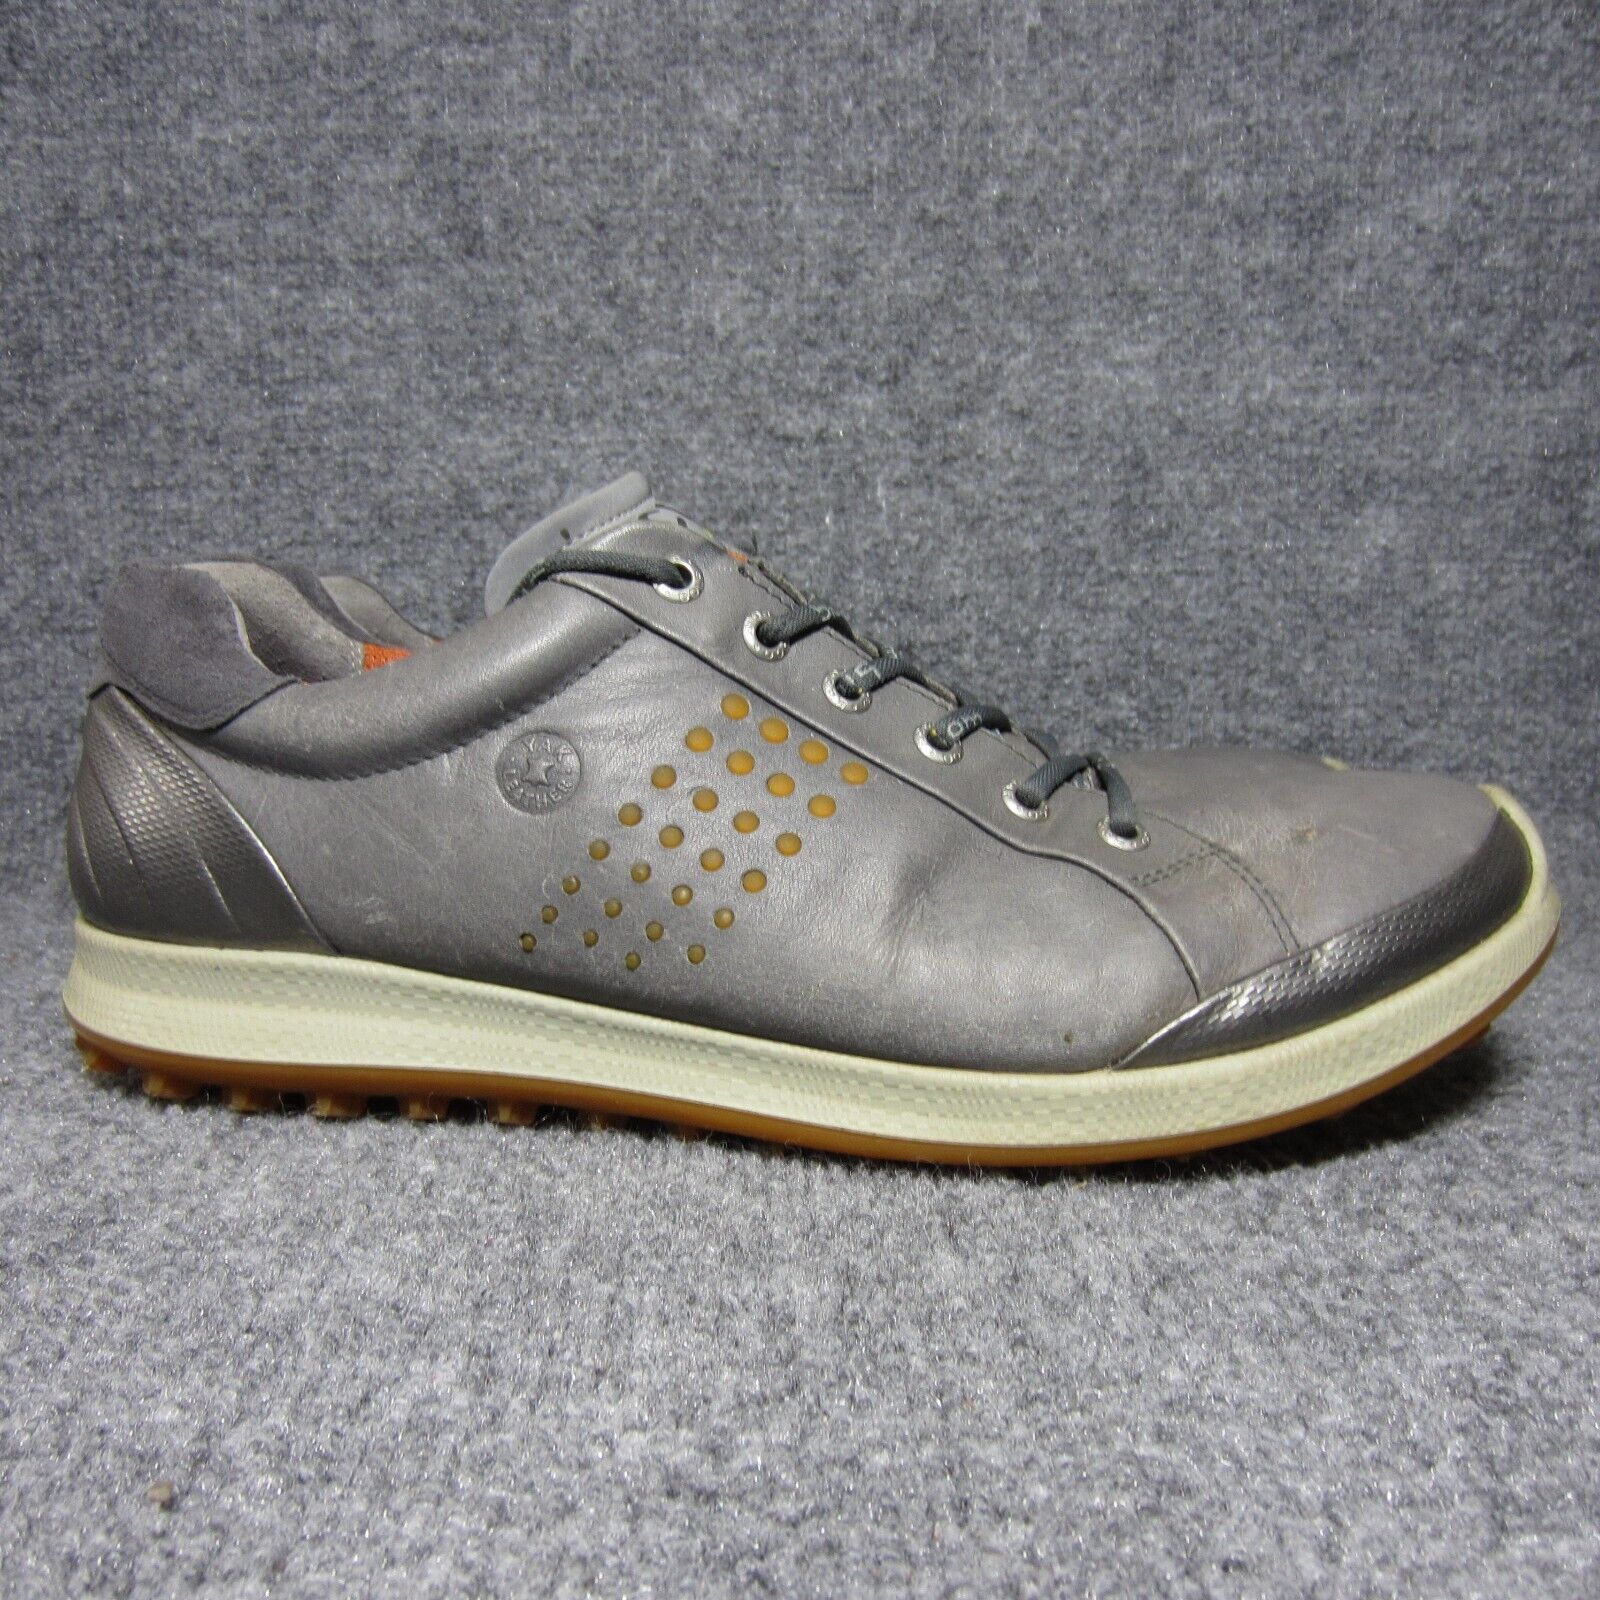 Ecco Yak Leather Spikeless Golf Shoes Mens Size 43 US 9-9.5 Gray